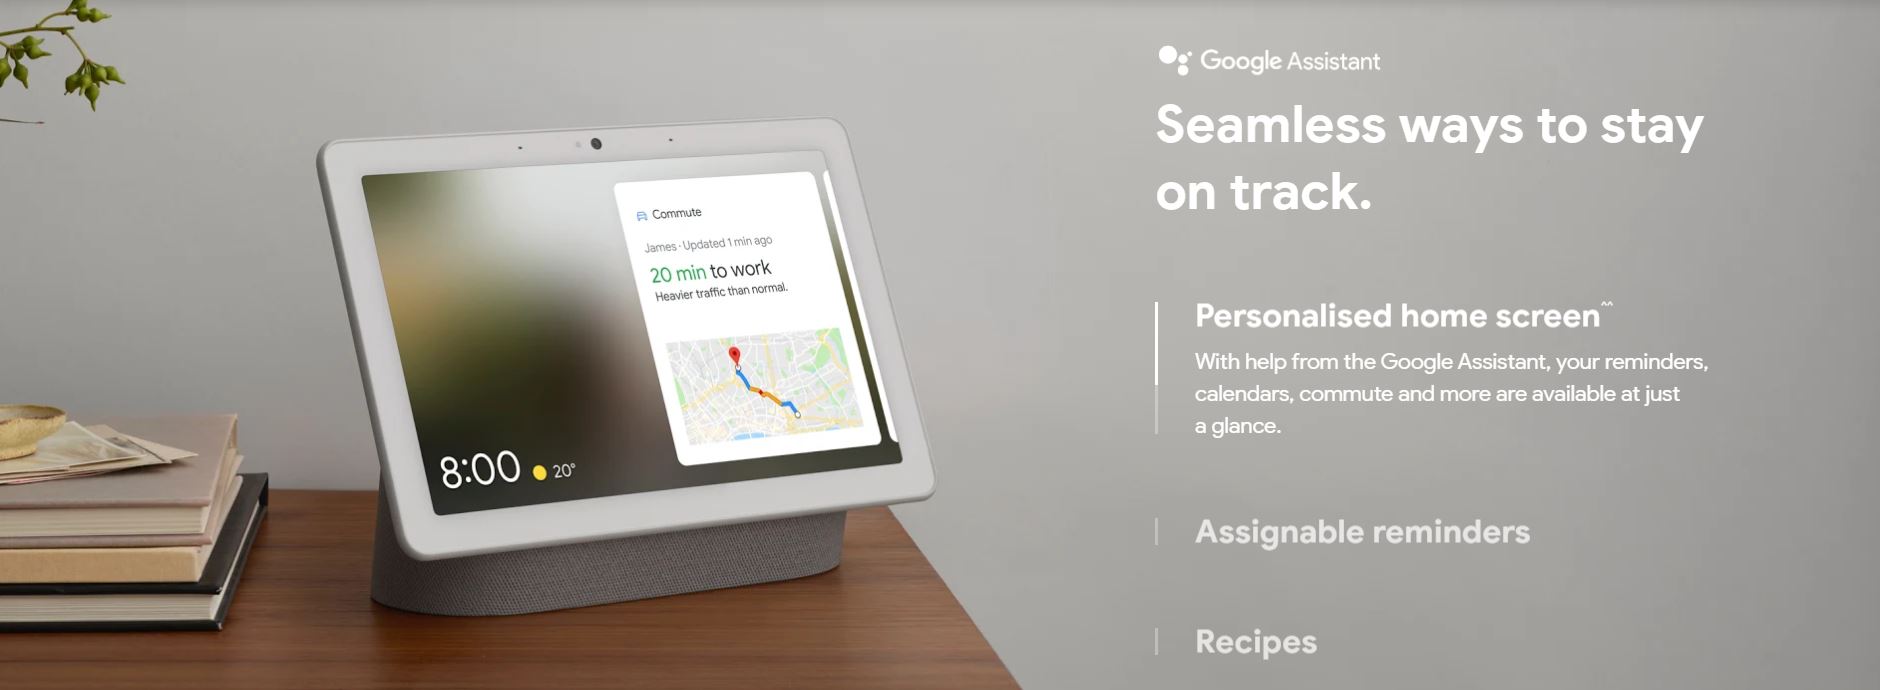 seamless-ways-to-stay-on-track-with-google-nest-hub-max